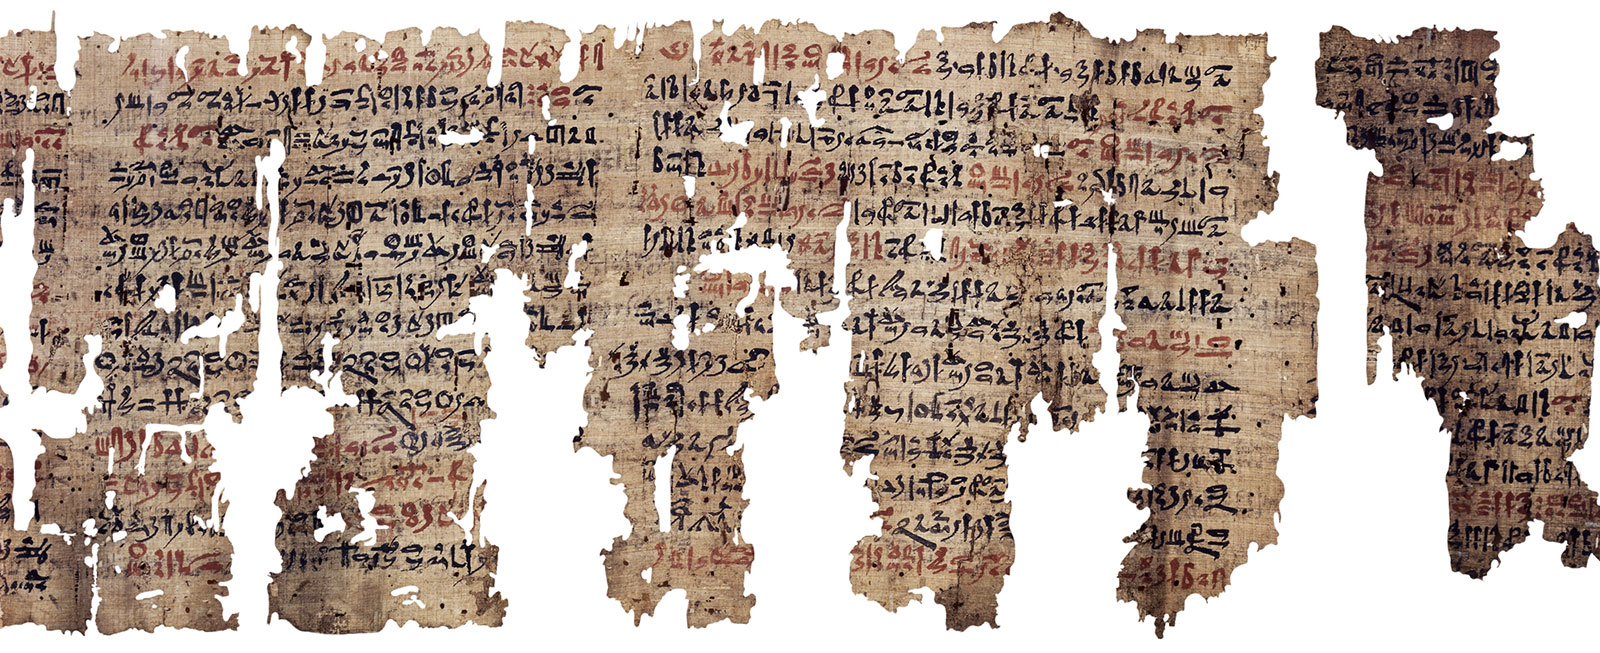 London Medical Papyrus, about 1300 B.C., Egyptian. Papyrus and ink, 7 7/8 × 45 1/2 in. The British Museum, EA10059,1. On loan from the Trustees of the British Museum. © The Trustees of the British Museum. Featured in the exhibition Beyond the Nile: Egypt and the Classical World